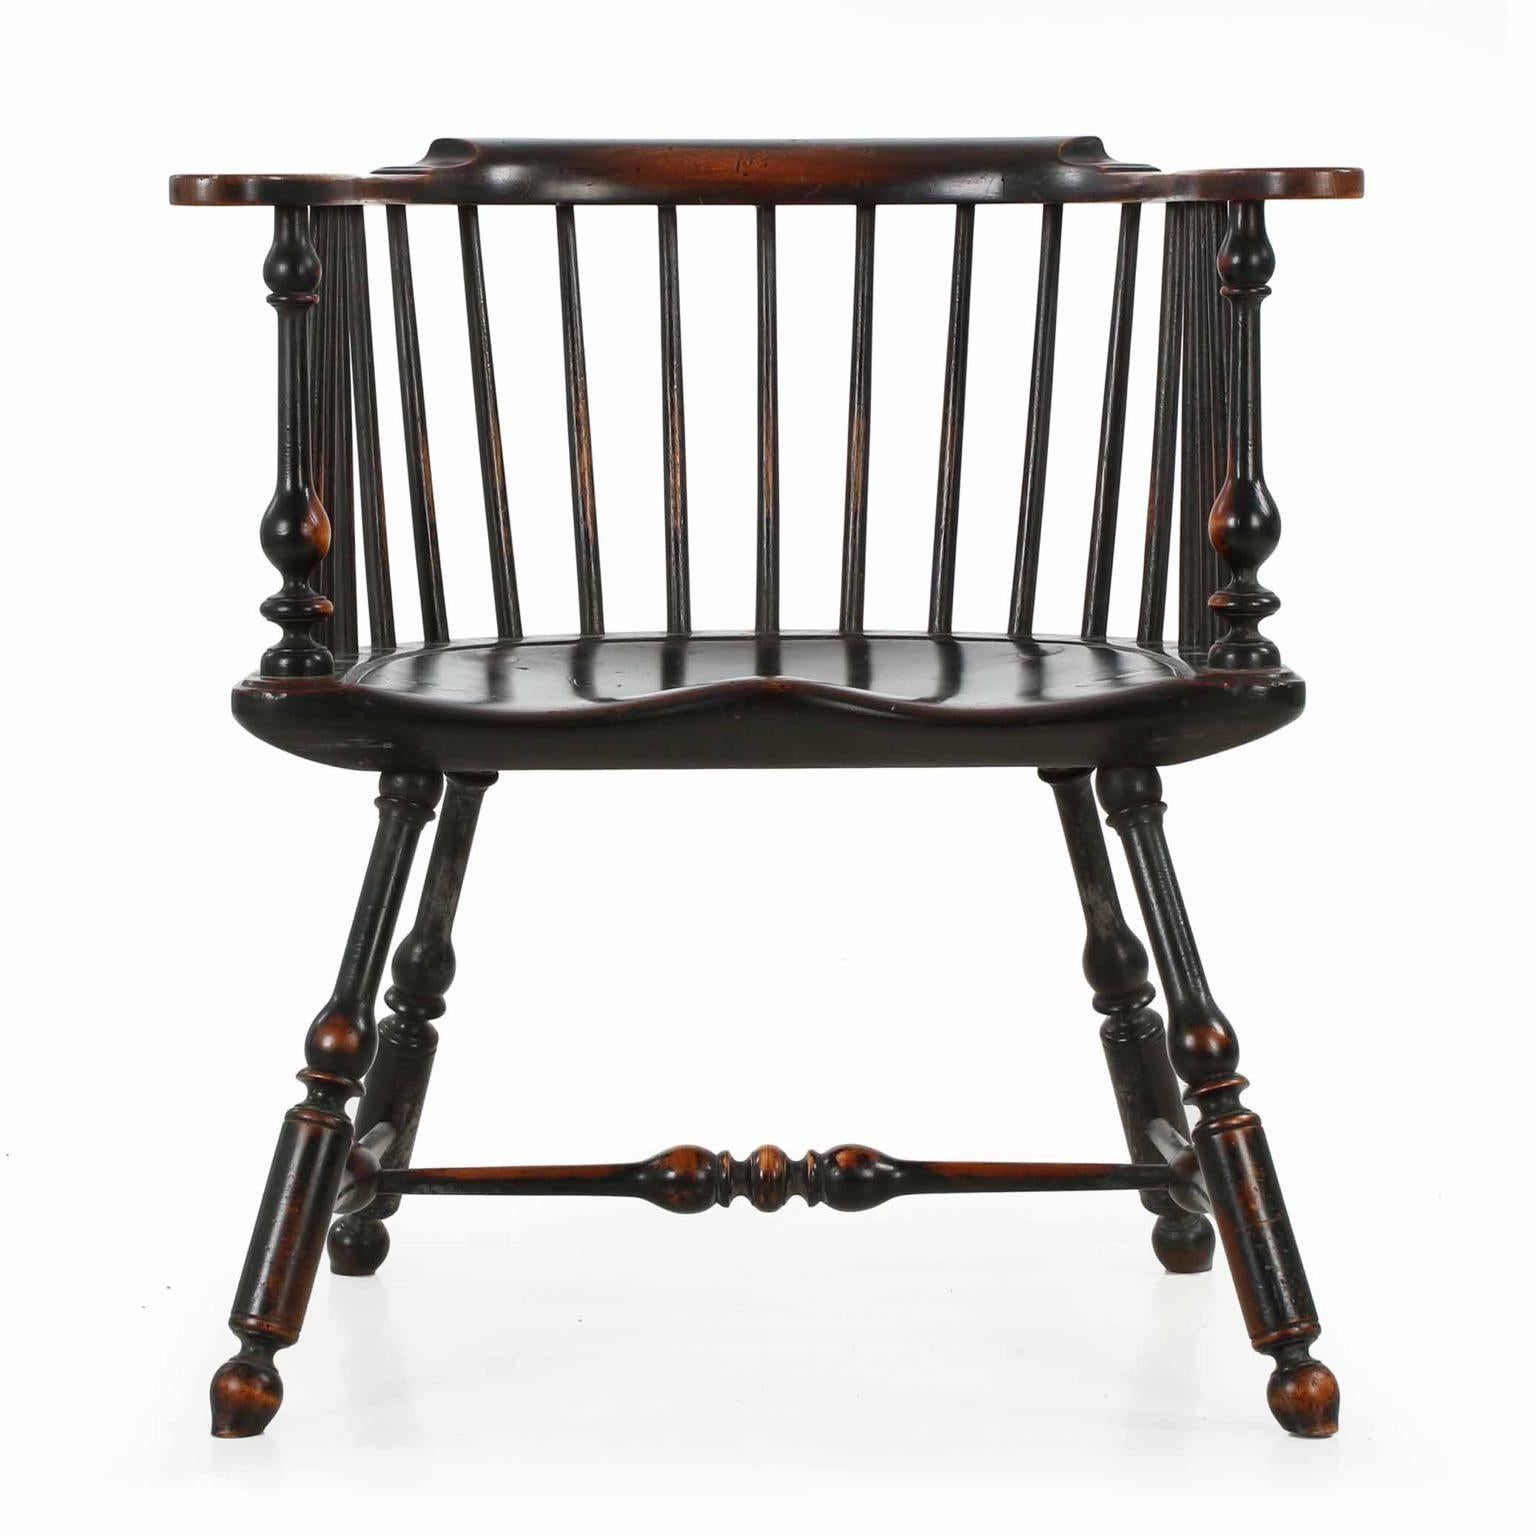 This very skillfully handcrafted chair perfectly replicates the original lowback windsor chairs of Philadelphia. It features a most attractive and carefully balanced splay in the turned legs, these the rather distinct turned-barrel and swollen